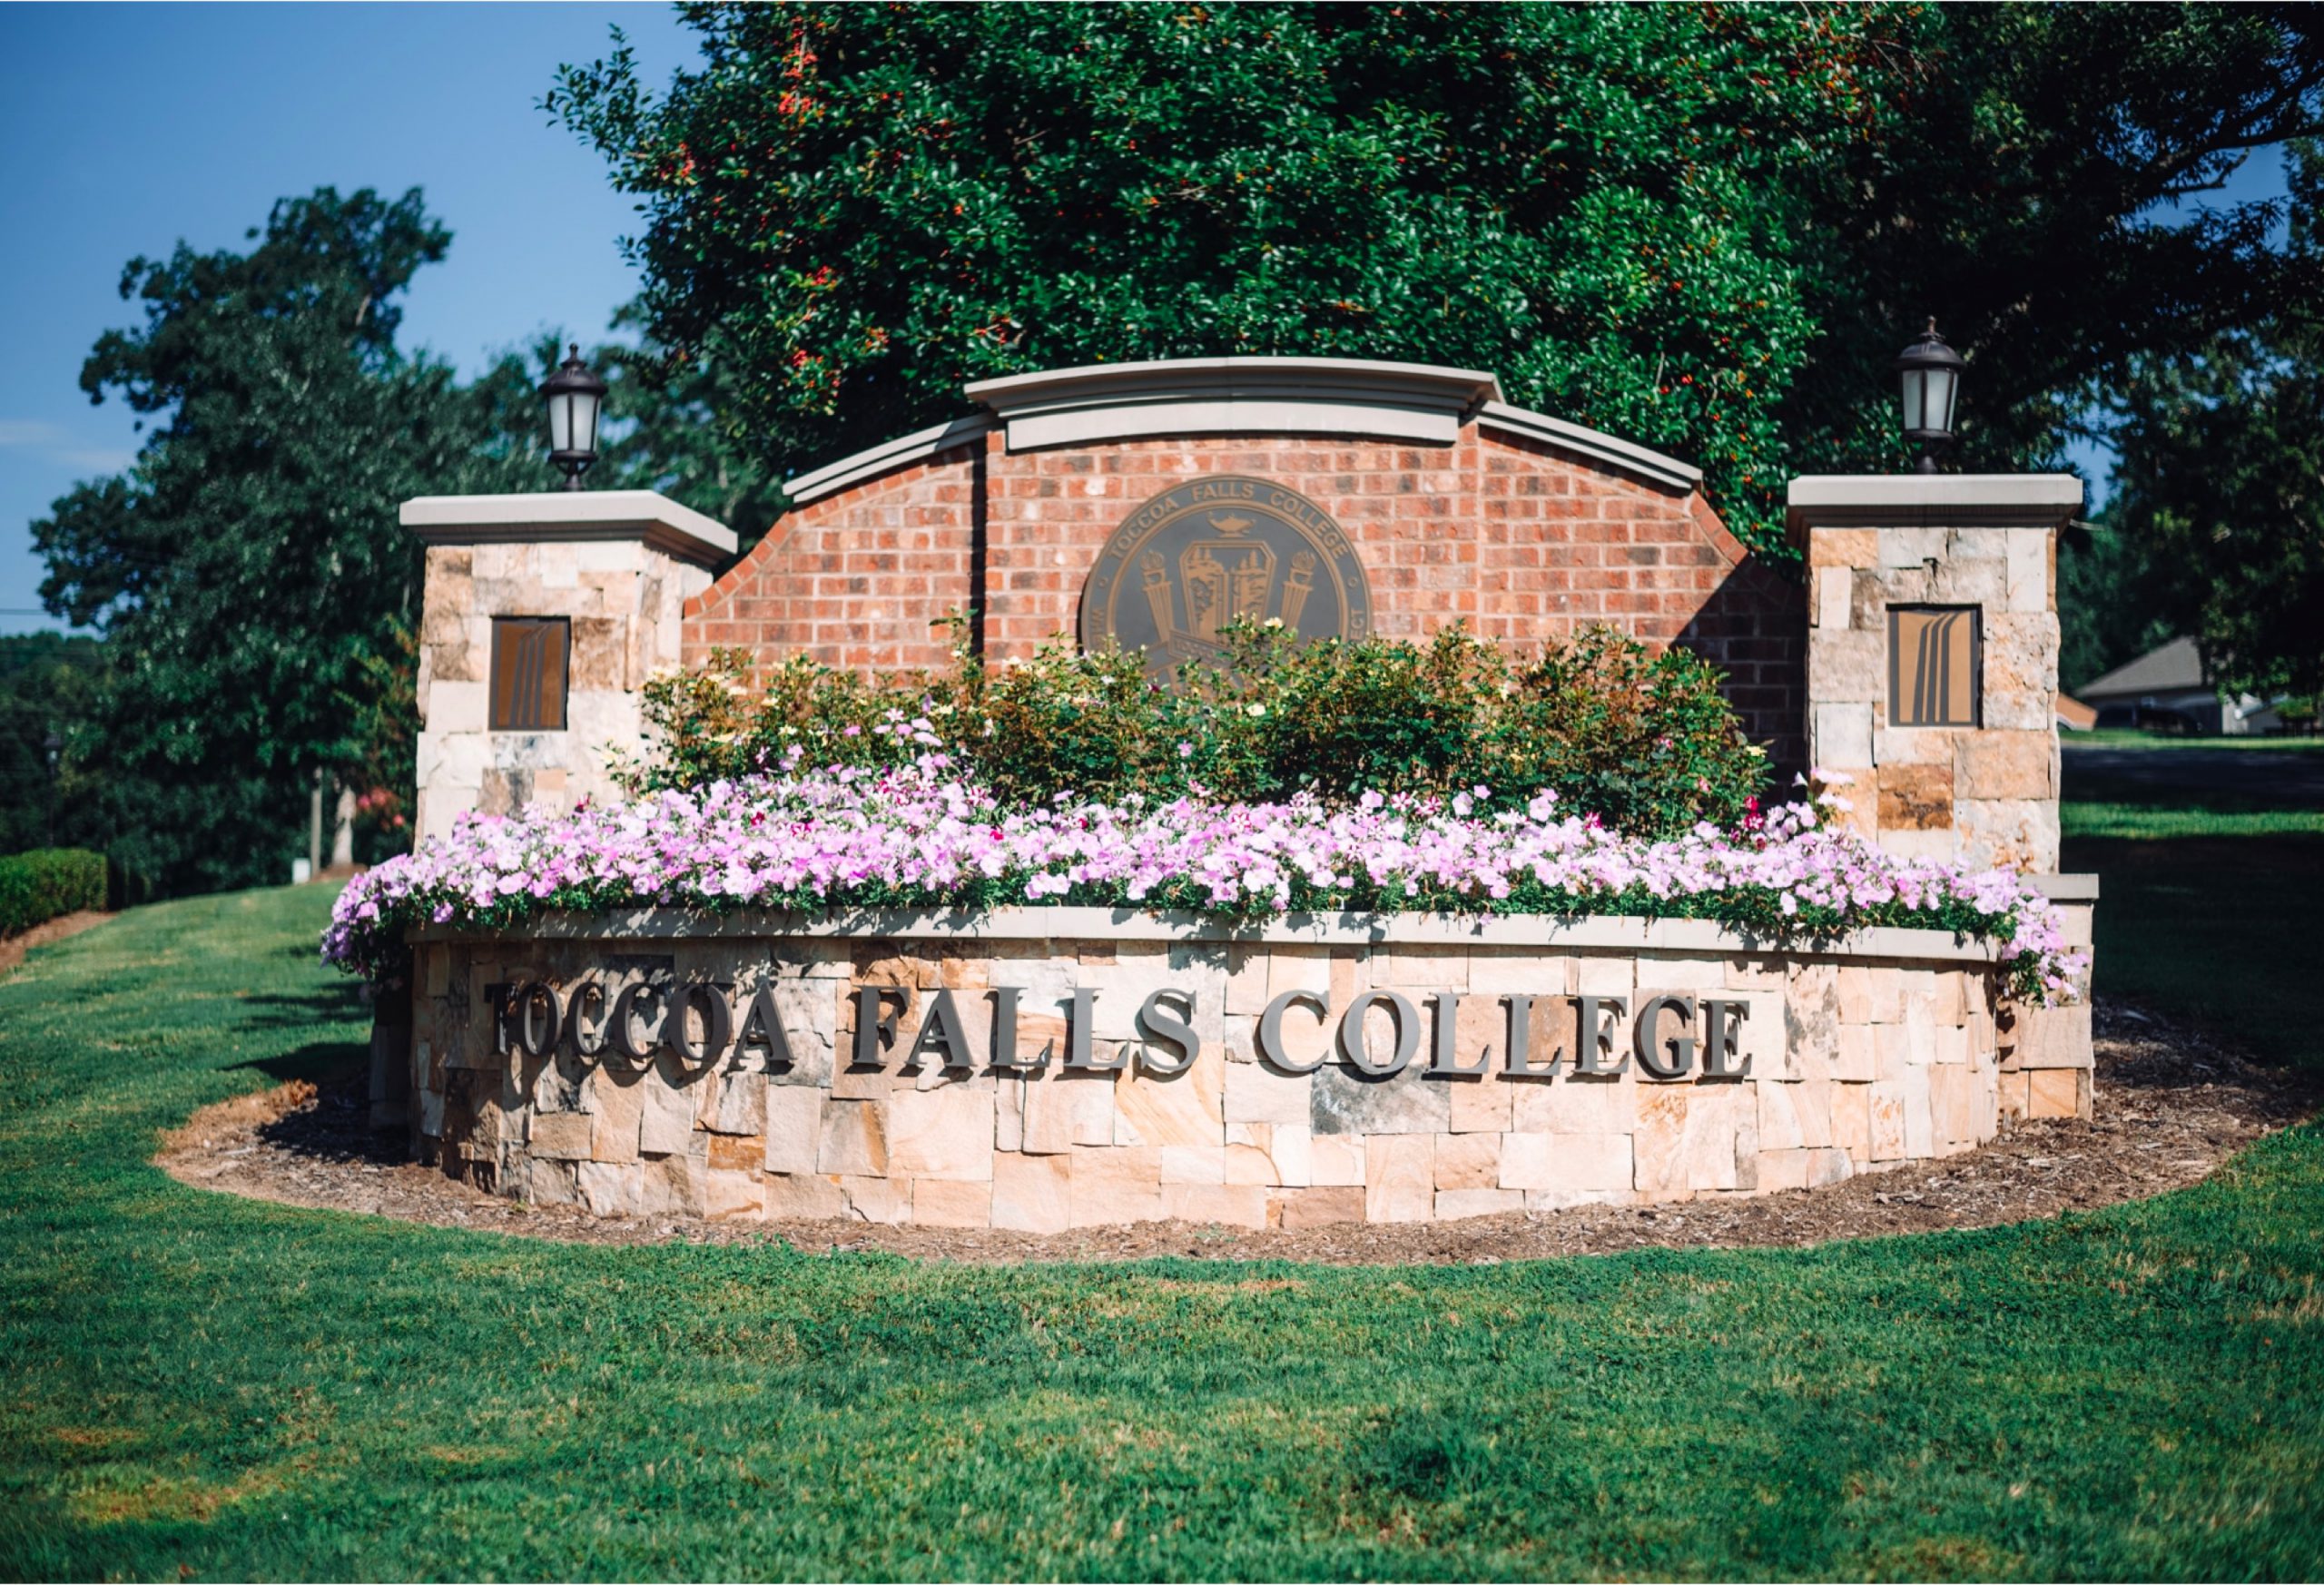 Entrance sign of Toccoa Falls College